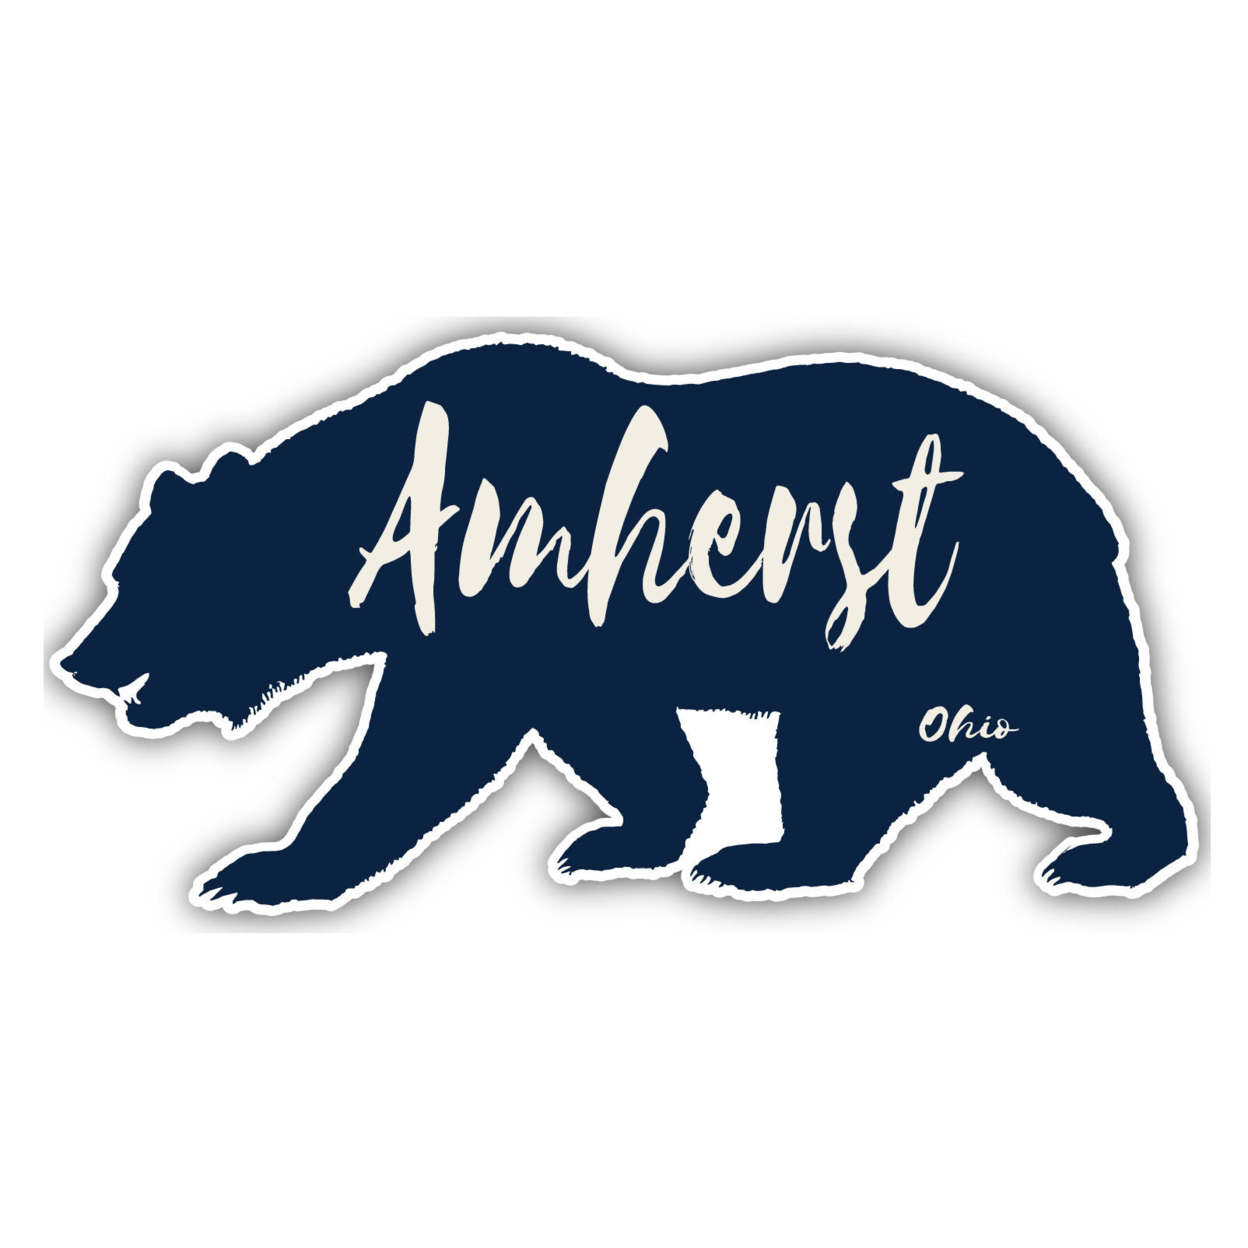 Amherst Ohio Souvenir Decorative Stickers (Choose Theme And Size) - 4-Pack, 10-Inch, Bear